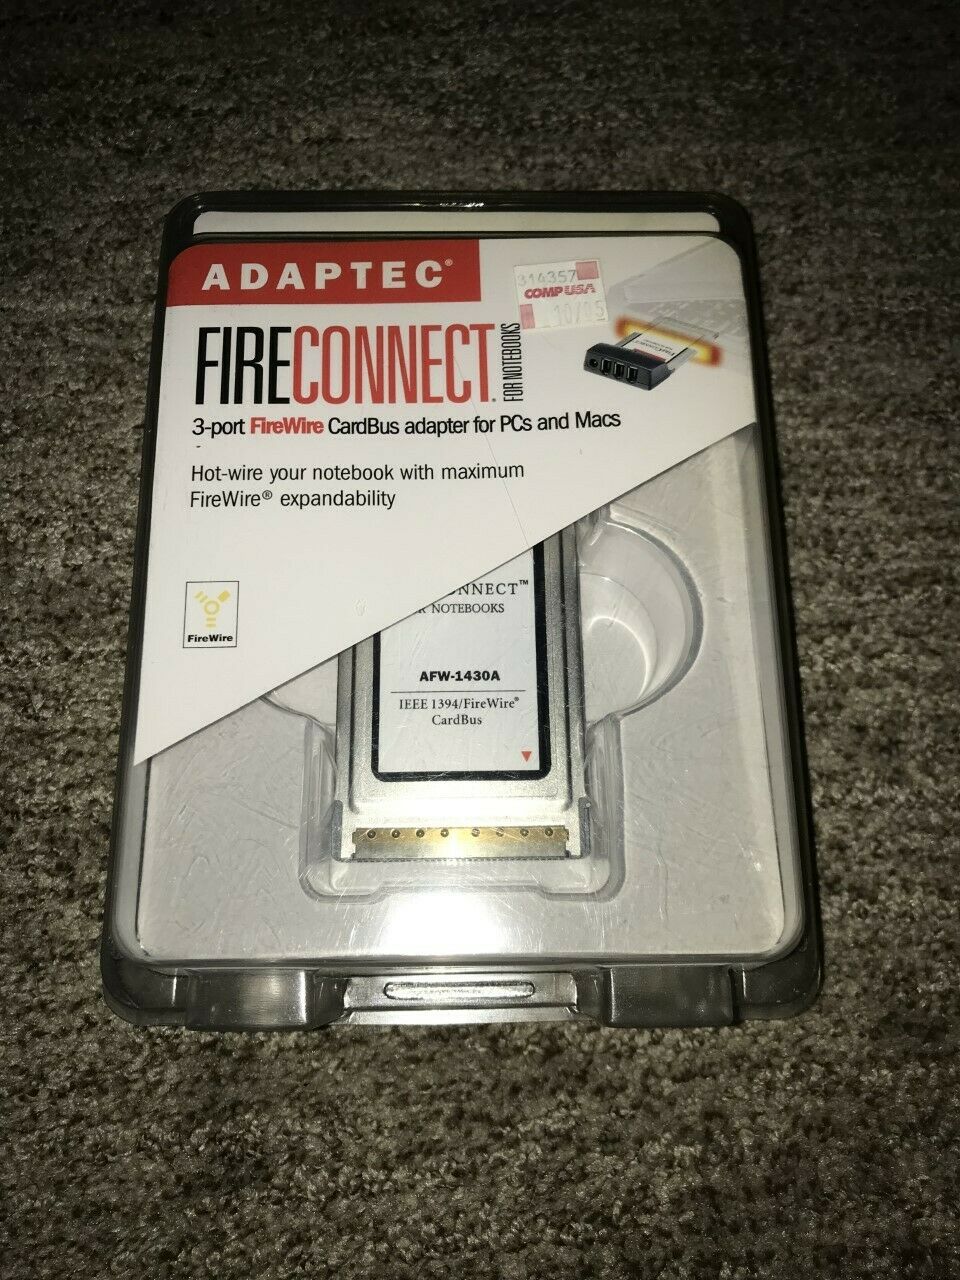 New Adaptec Fire Connect For Mac & Notebooks - 3-port Firewire Cardbus Afw-1430a